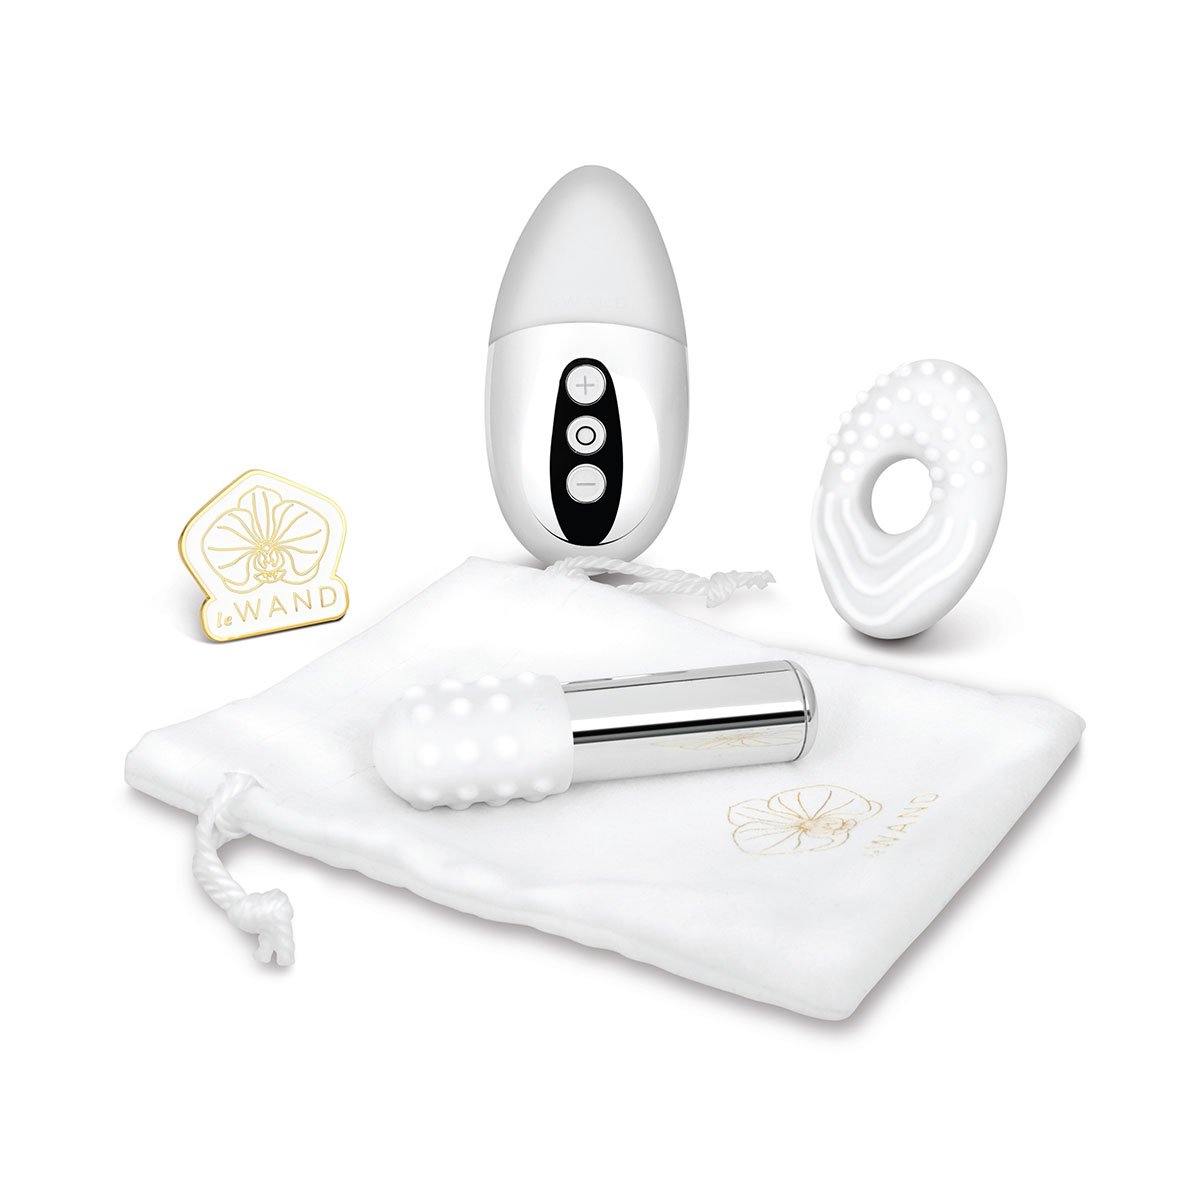 Le Wand Little Pleasures 6pc Kit - Buy At Luxury Toy X - Free 3-Day Shipping